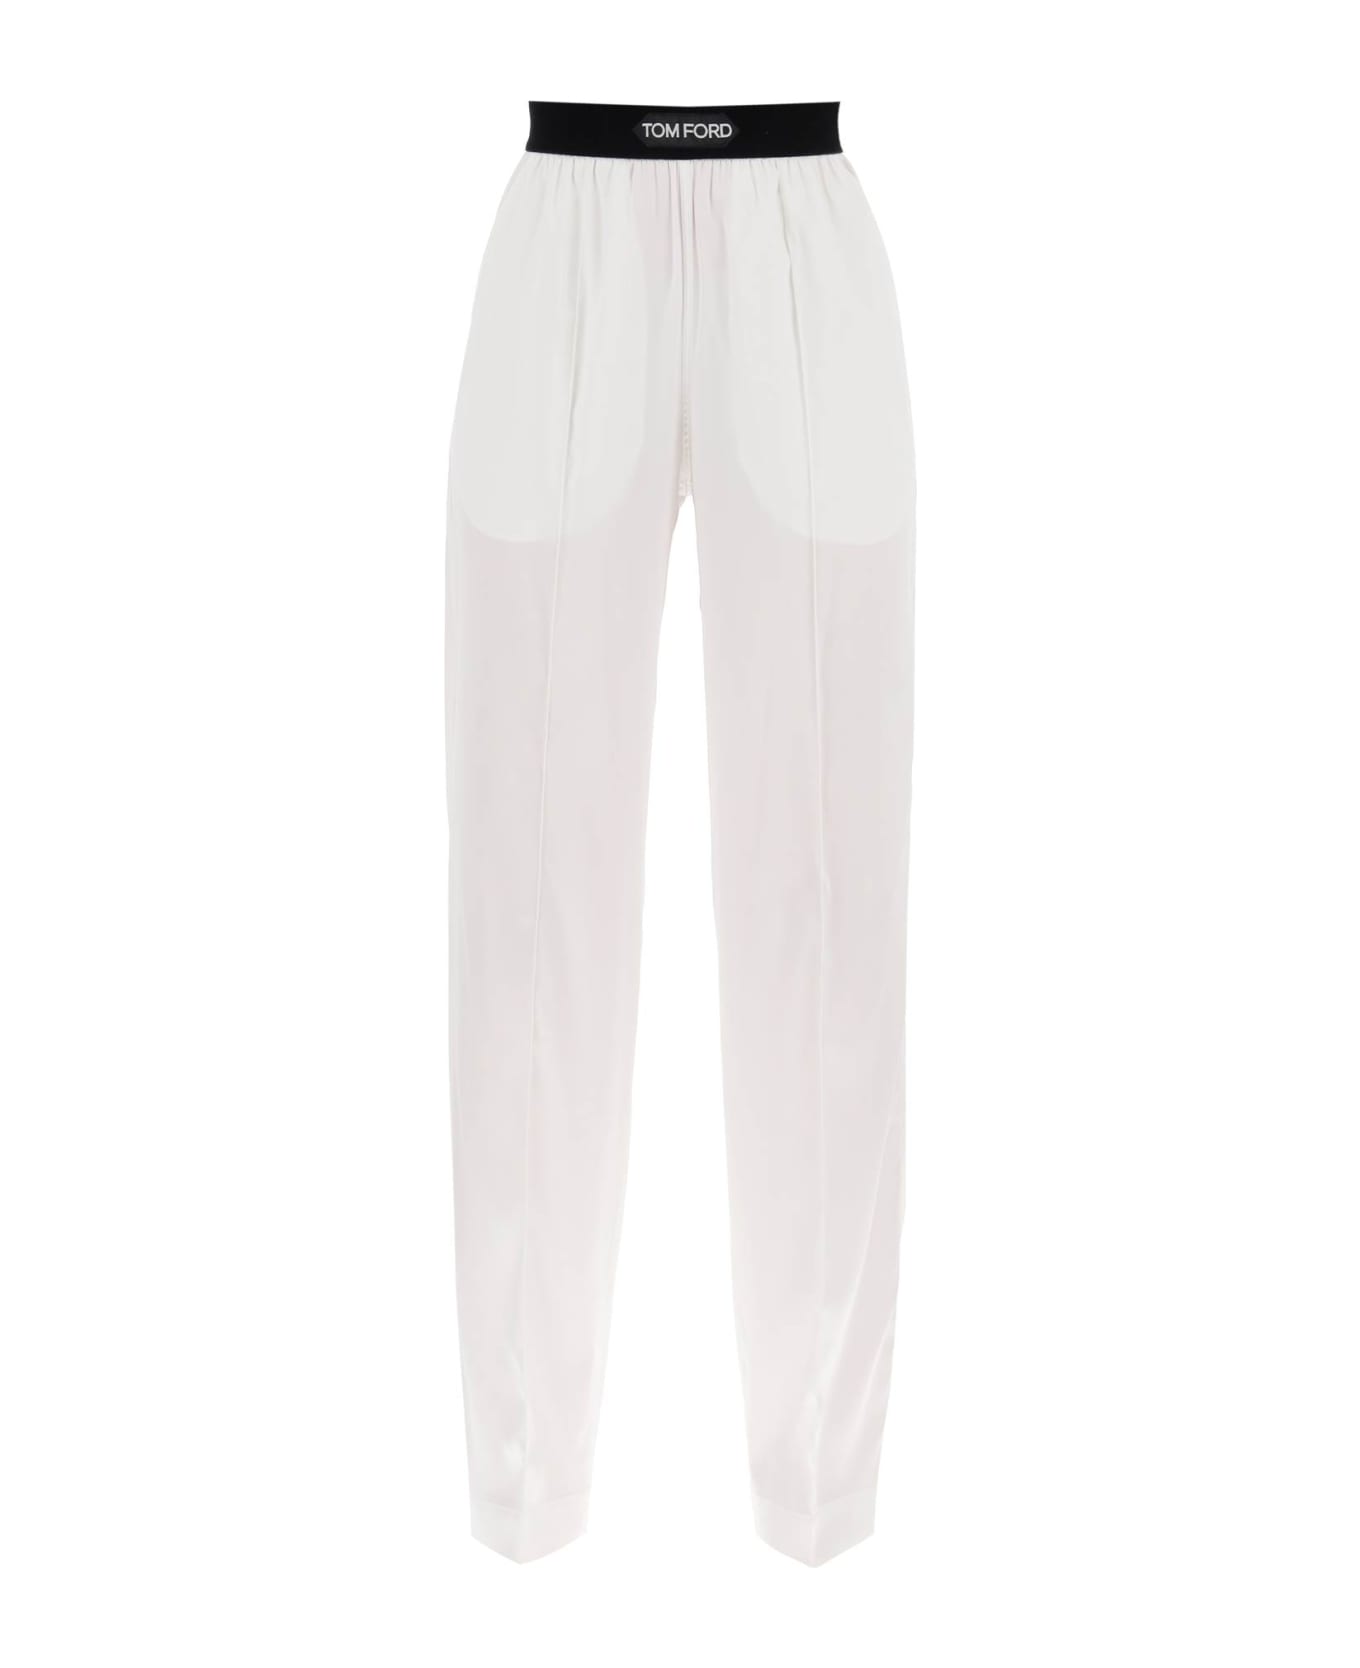 Tom Ford Silk Trousers - White ボトムス